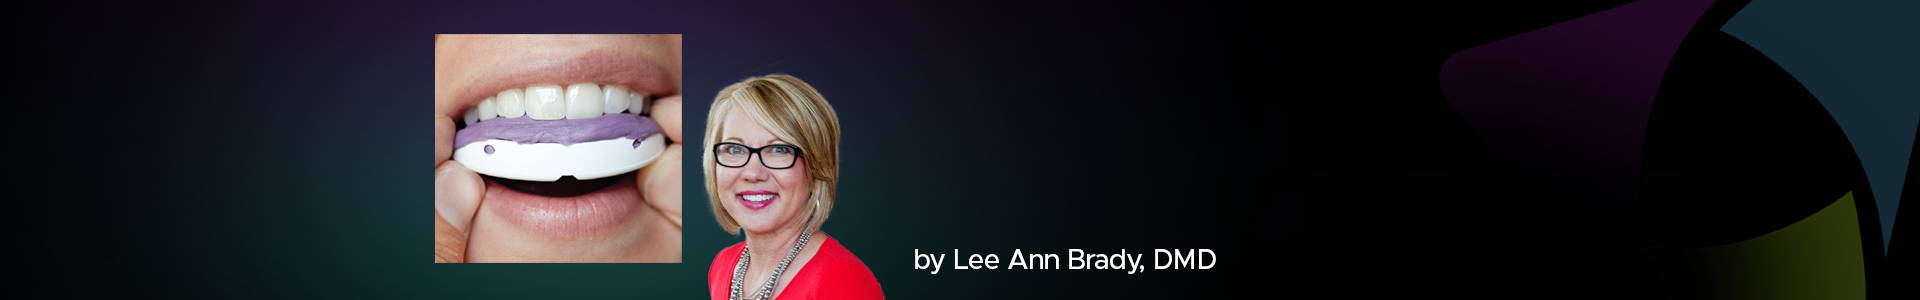 blog banner featuring Dr Lee Ann Brady and a clinical image